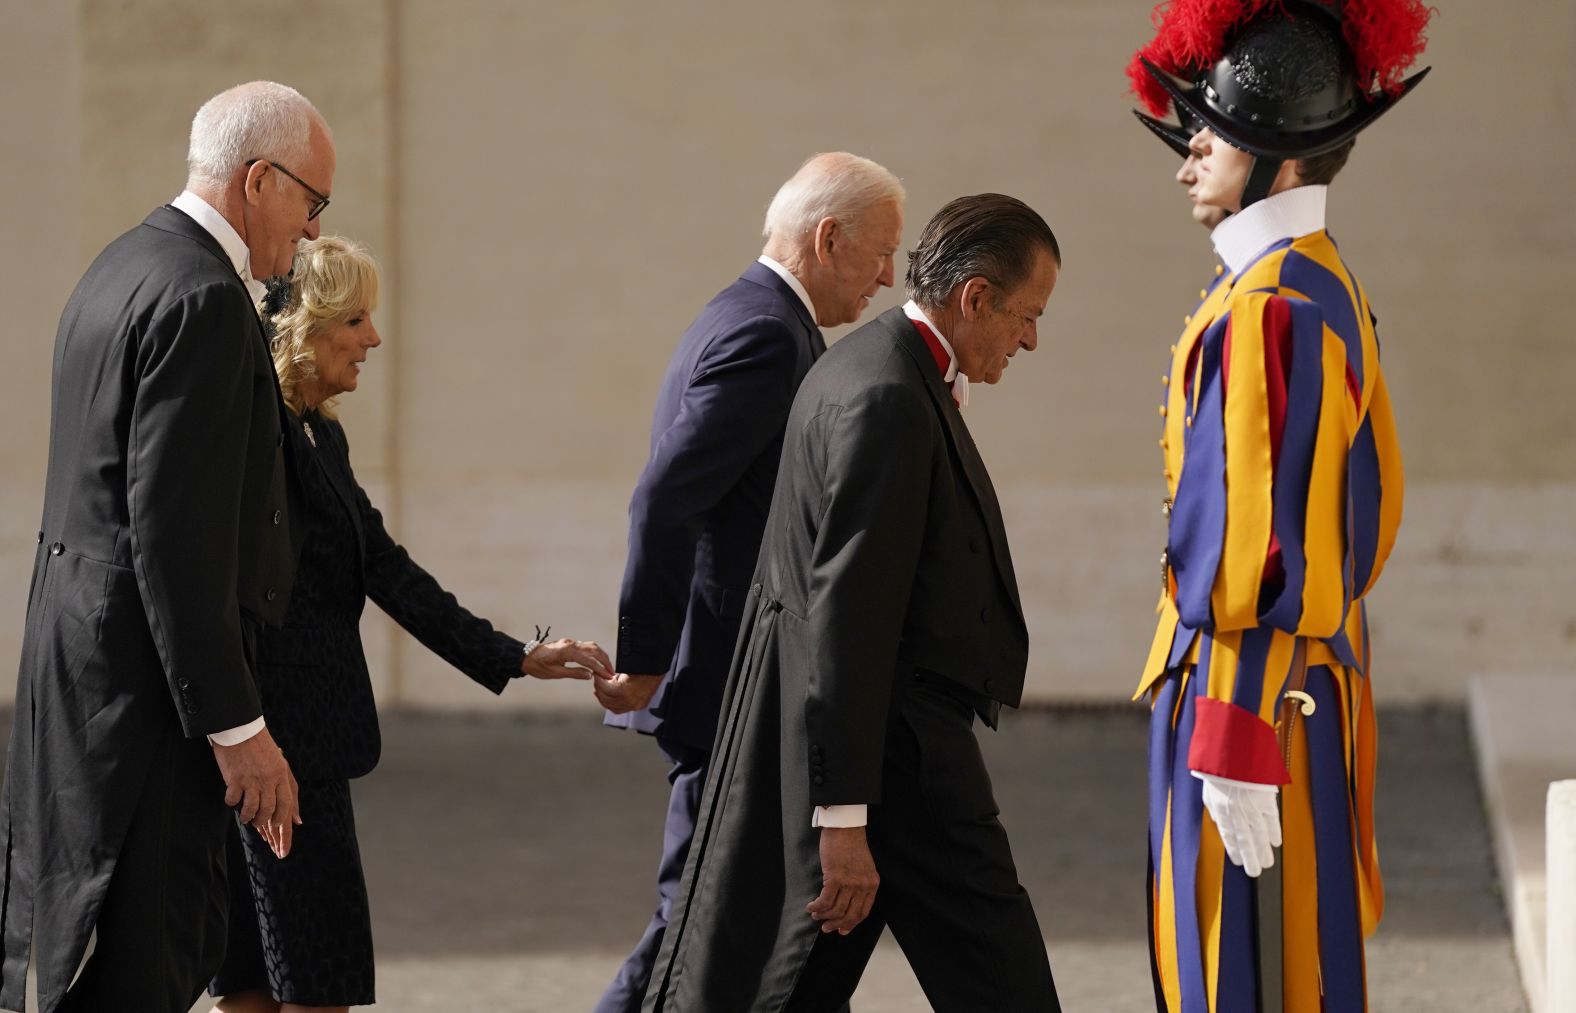 First lady Jill Biden reaches out to touch the President's hand as they arrive for their meeting with Francis.